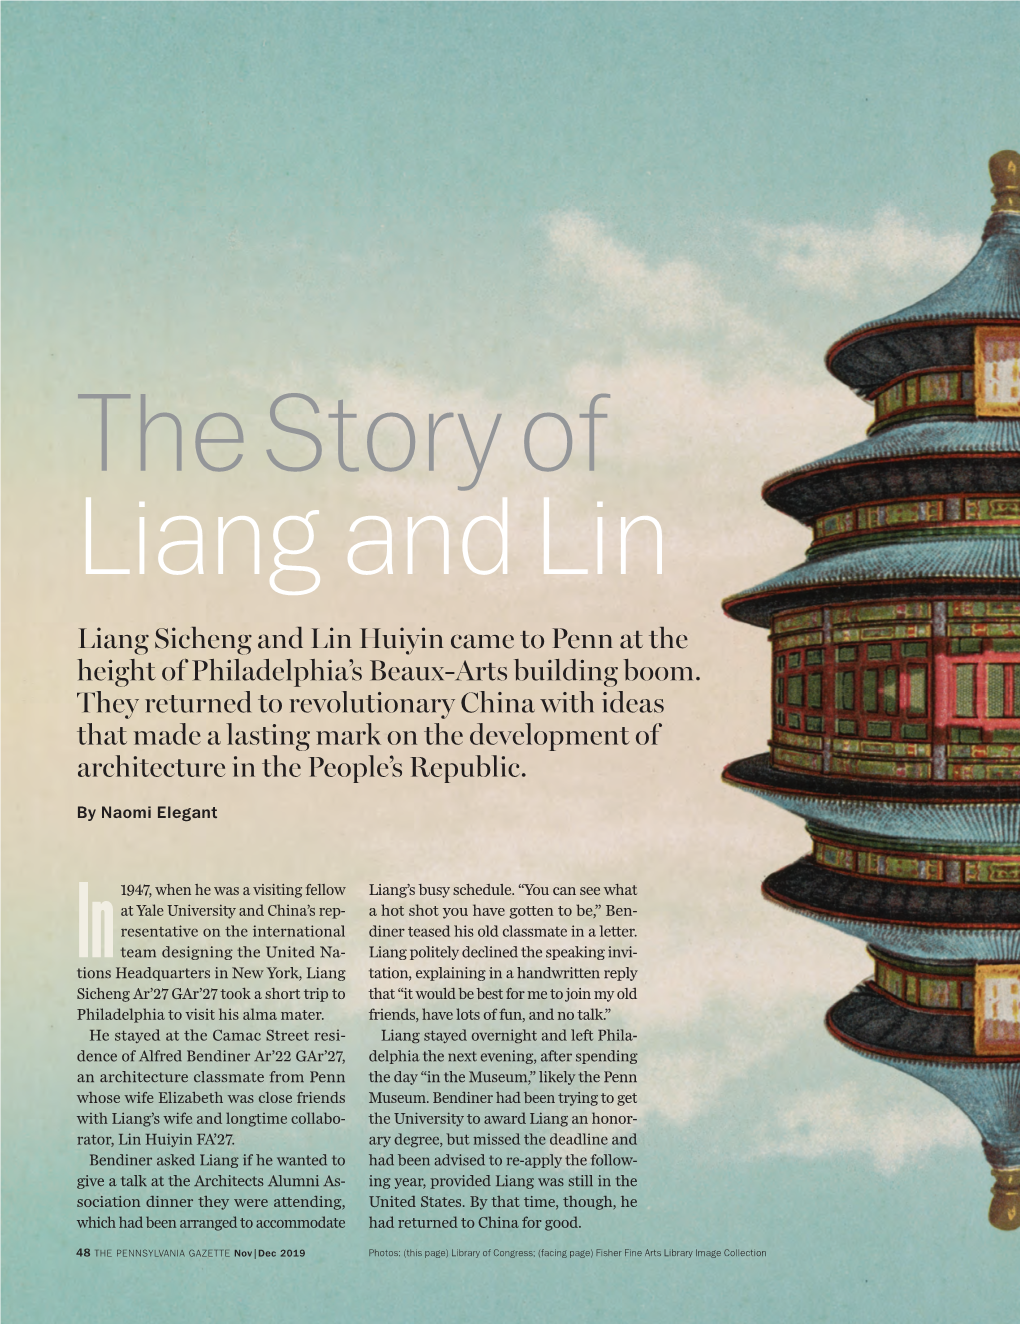 The Story of Liang and Lin